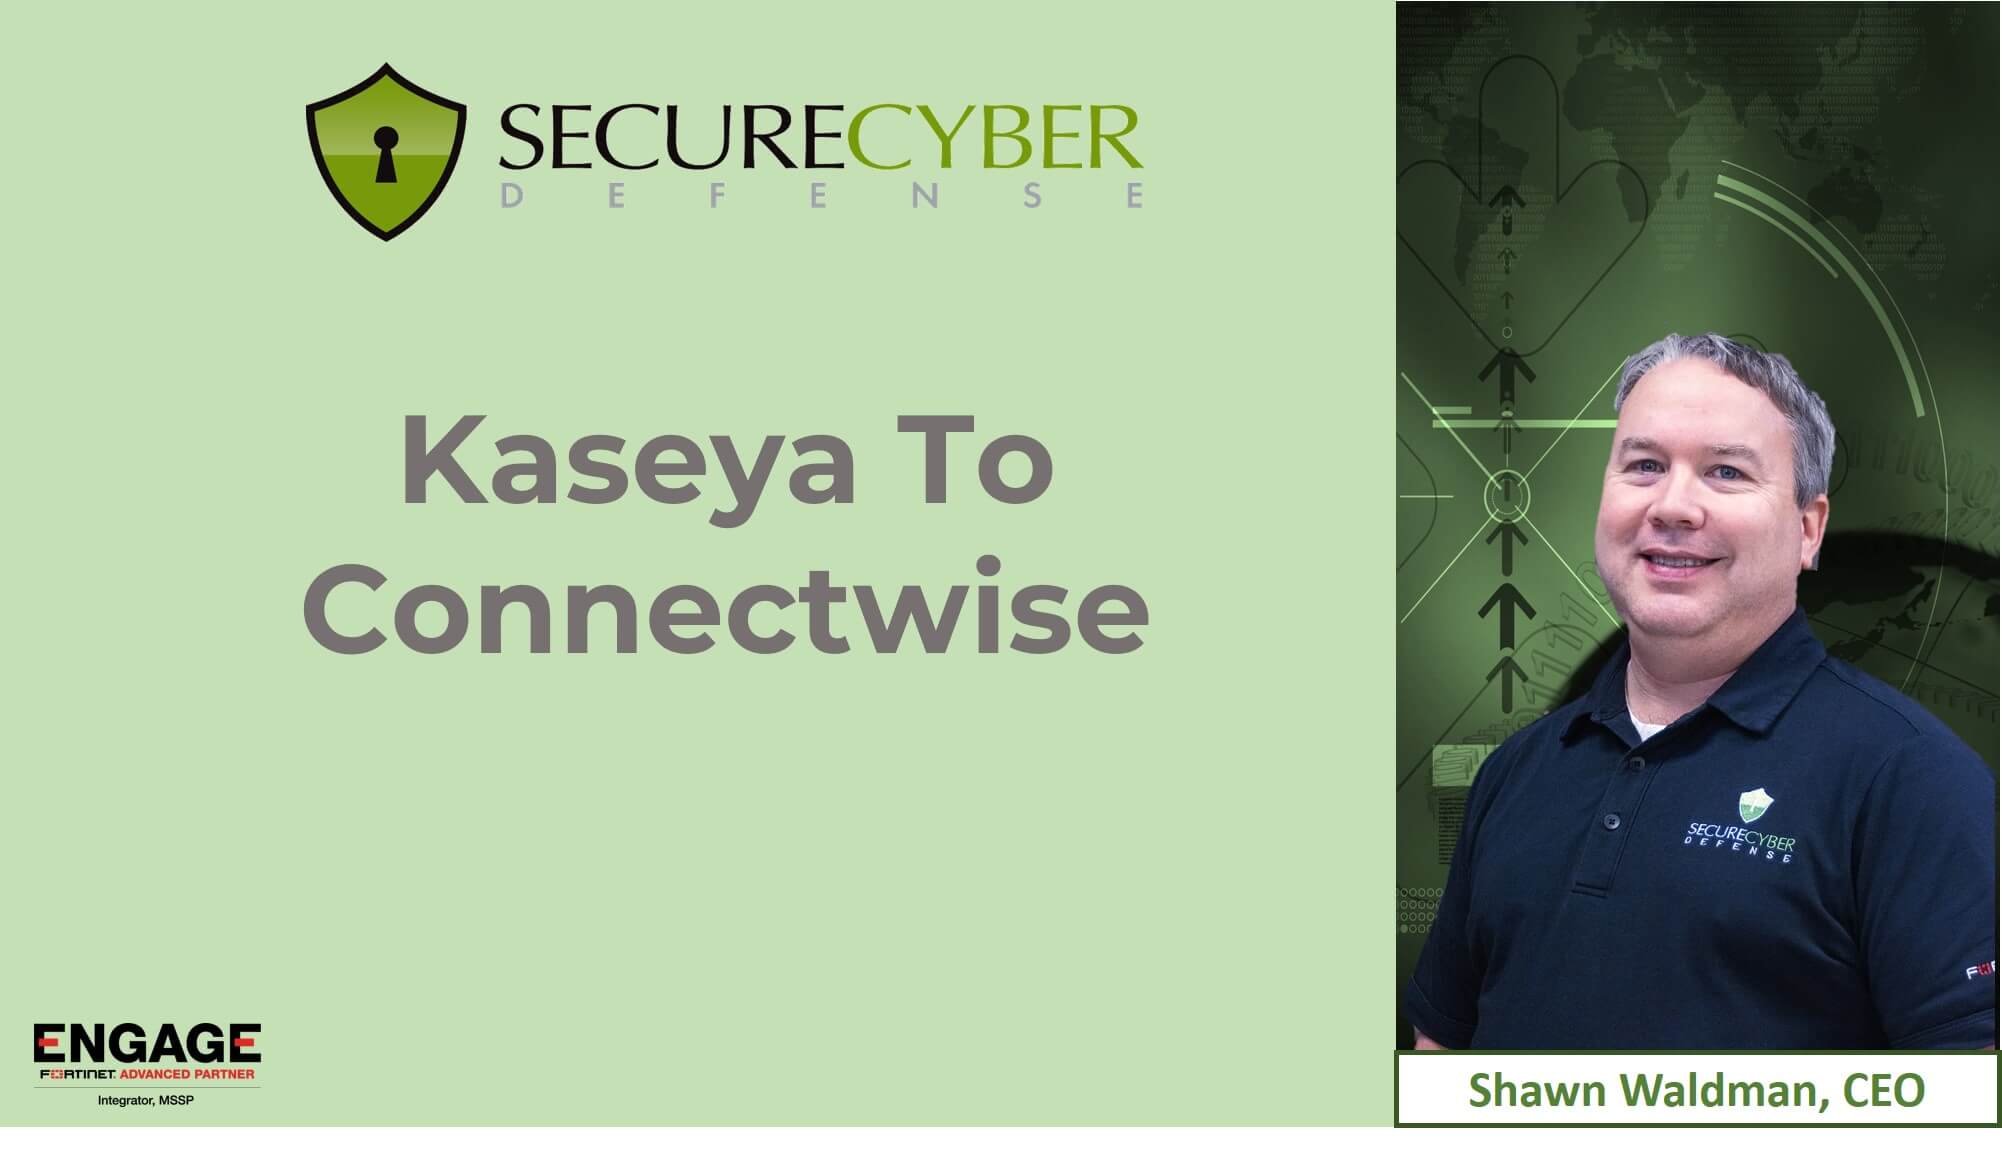 Kaseya To Connectwise Secure Cyber Defense